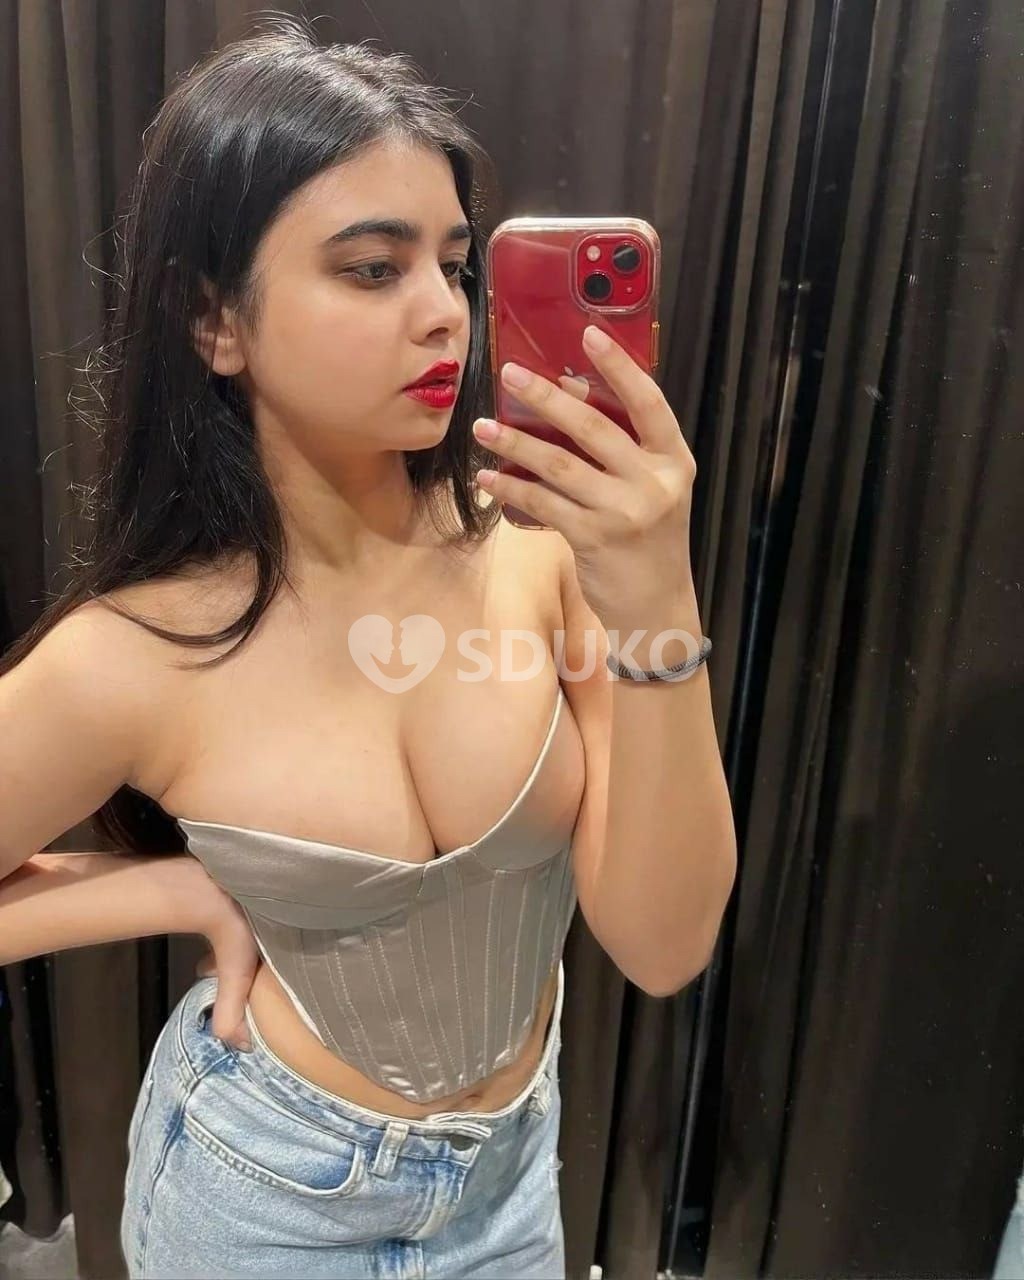 Bangalore vip genuine in ⭐⭐⭐💯 Royal Eskort Sarvice Safe and secure service low price High profile girls avakq